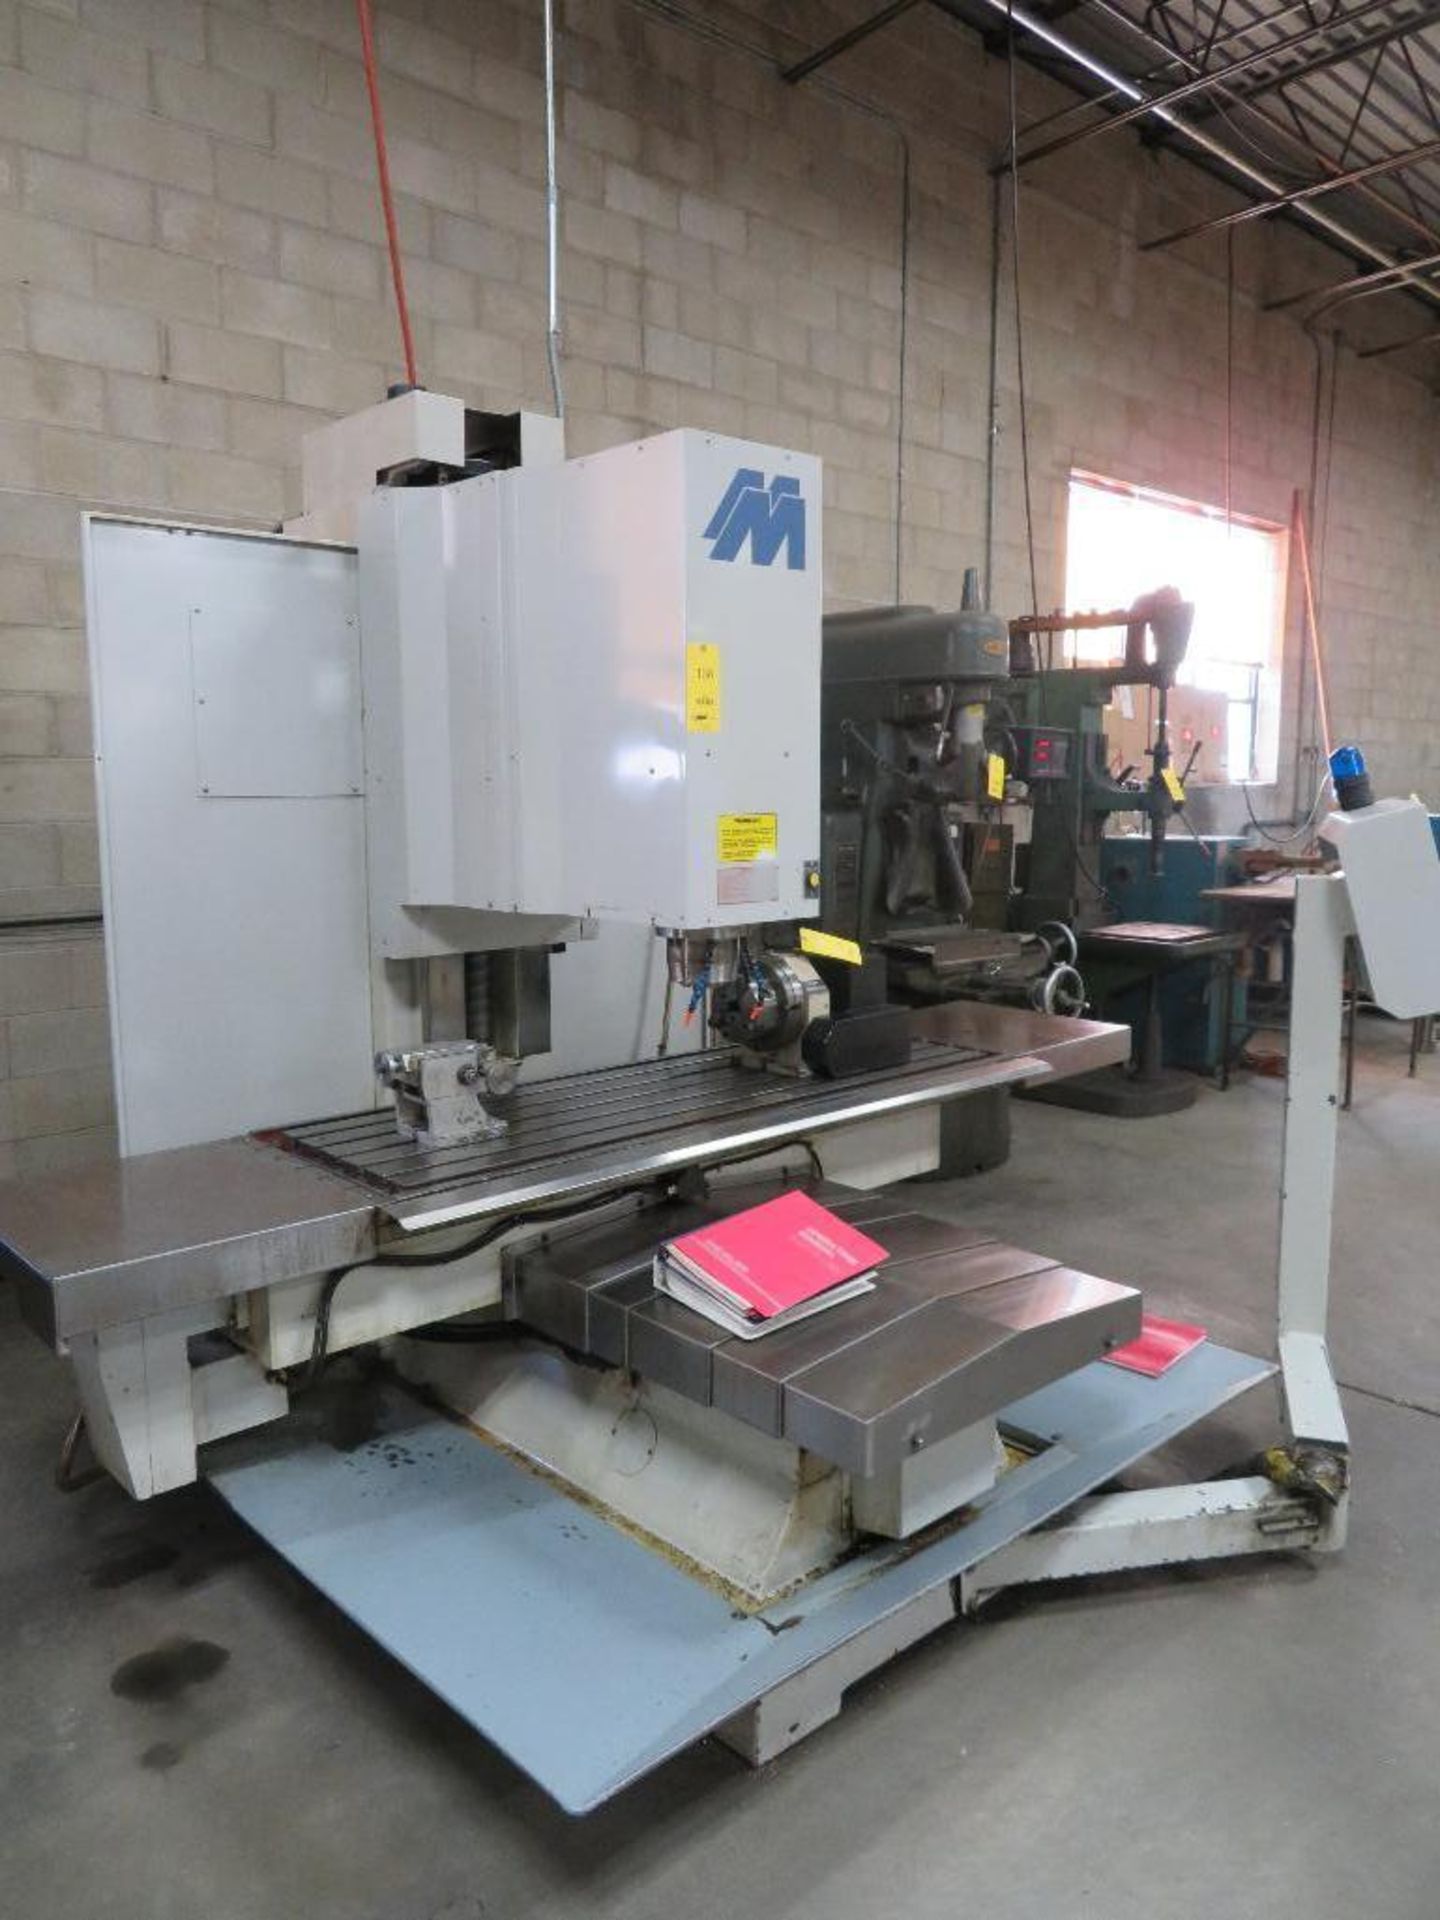 Milltronics 4-Axis CNC Vertical Mill Model RH-30, Series G, S/N 9080(0617), 24 in. x 66 in. Work - Image 2 of 6